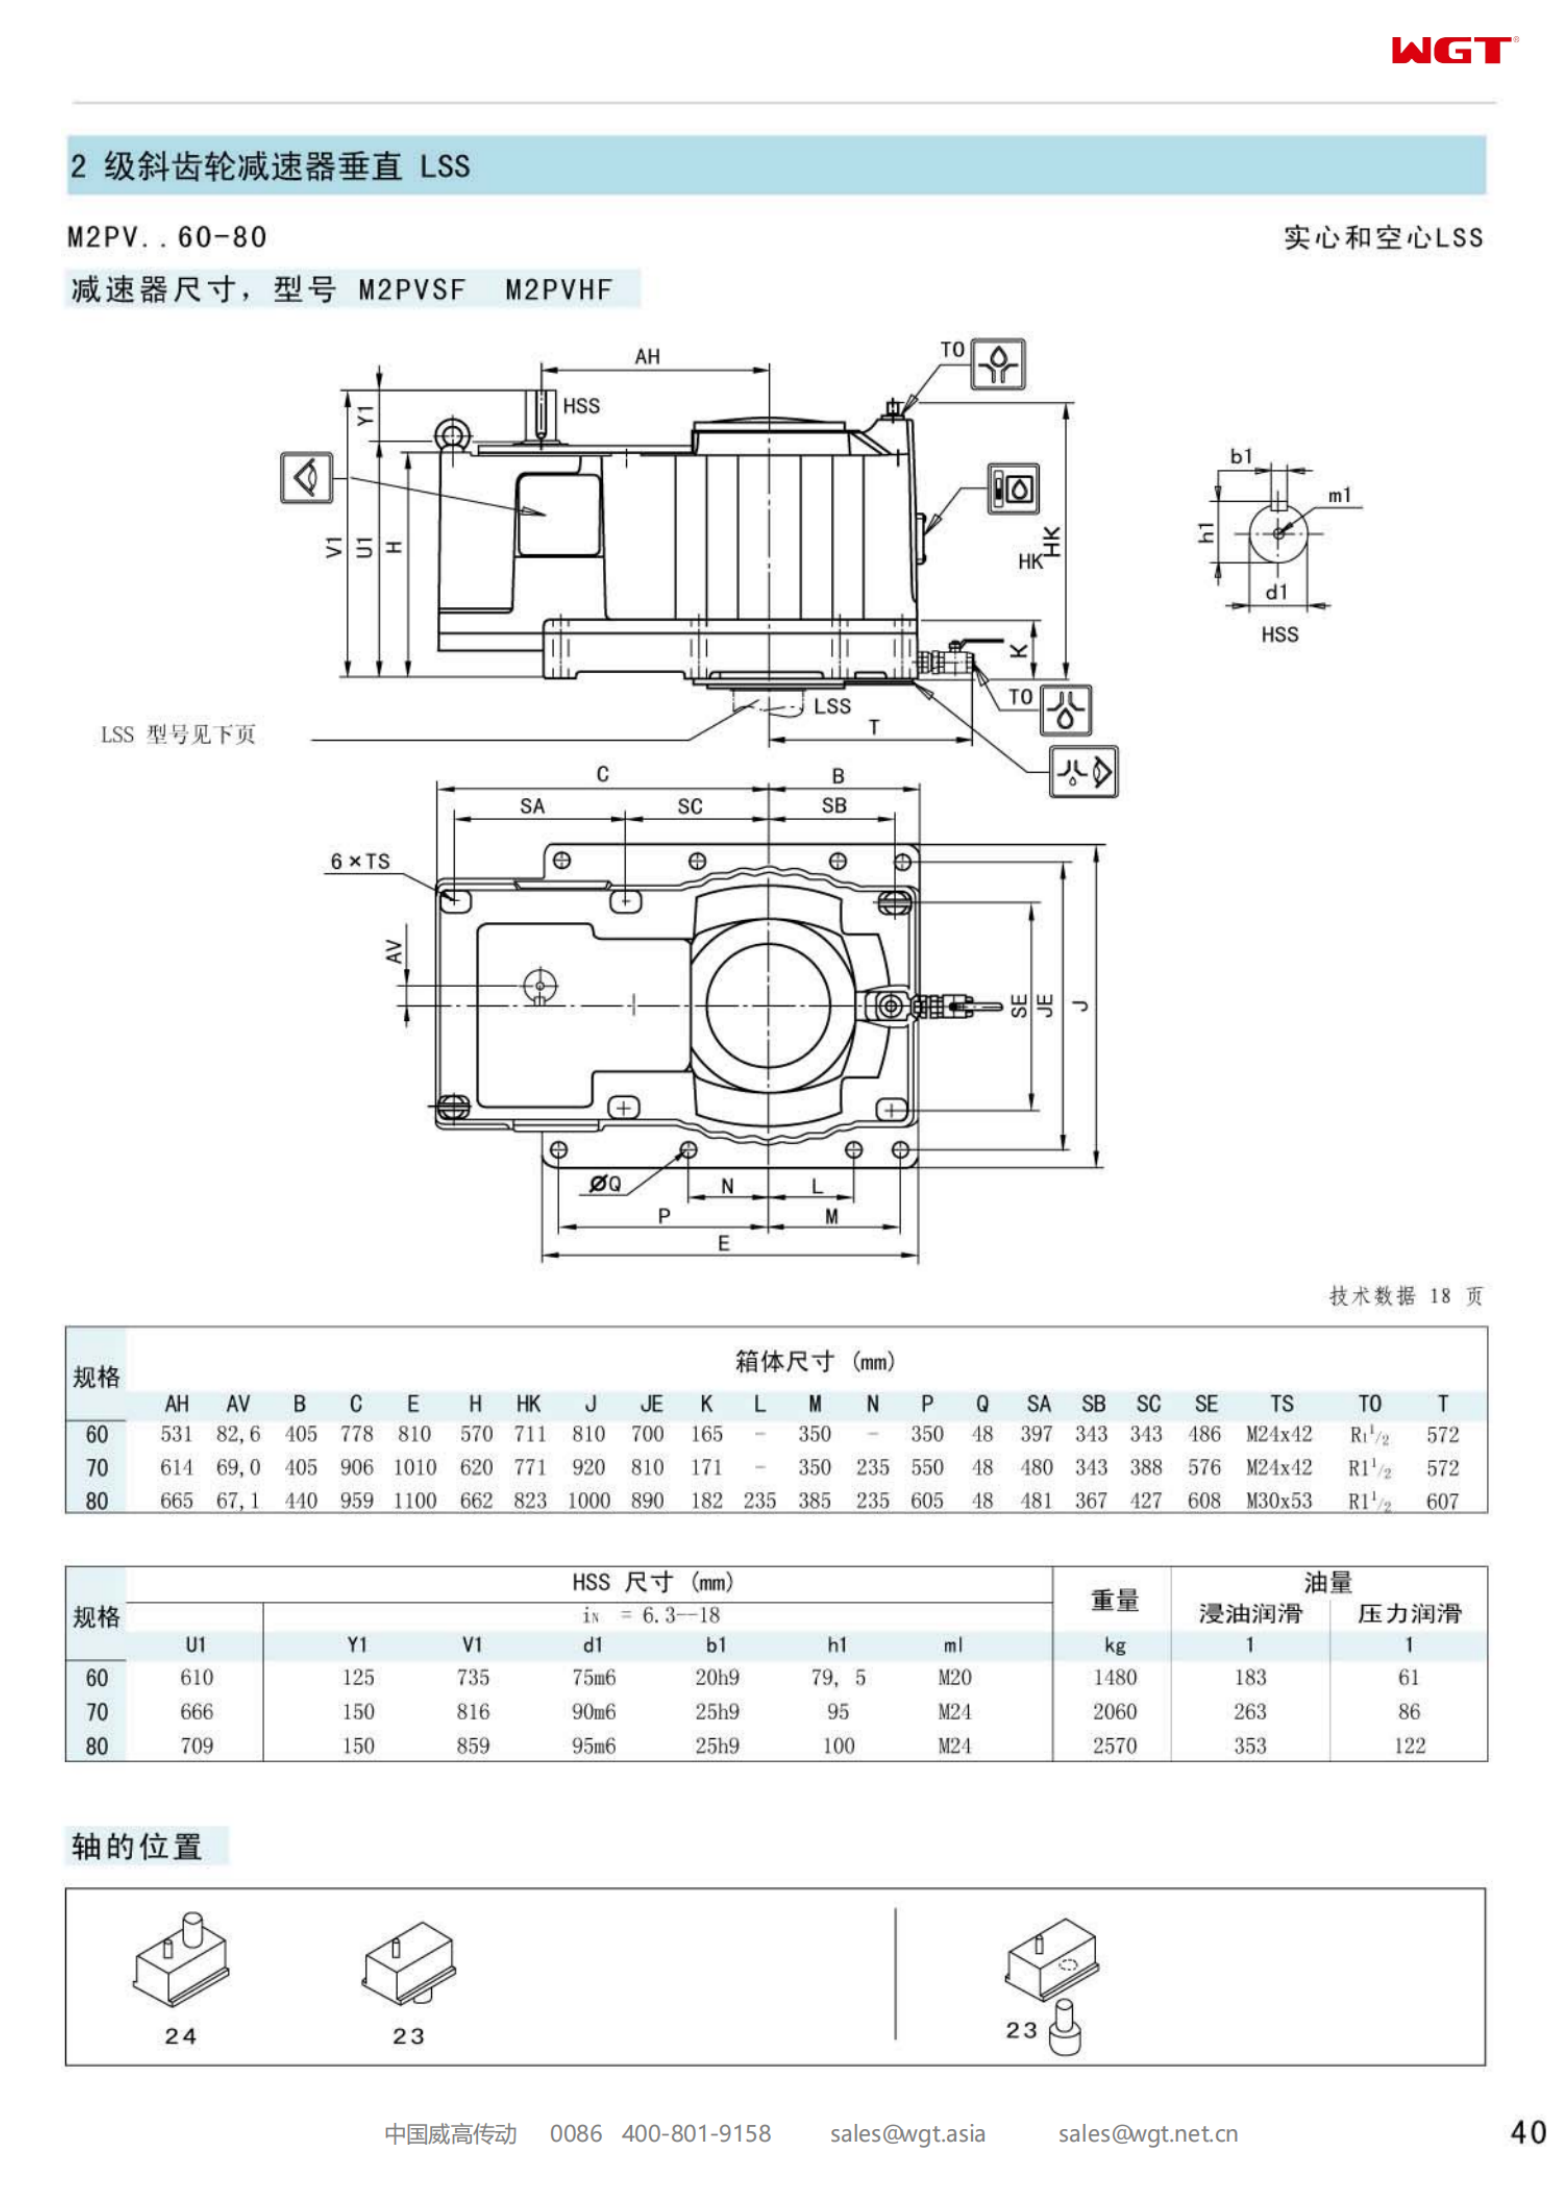 M2PVHF70 Replace_SEW_M_Series Gearbox